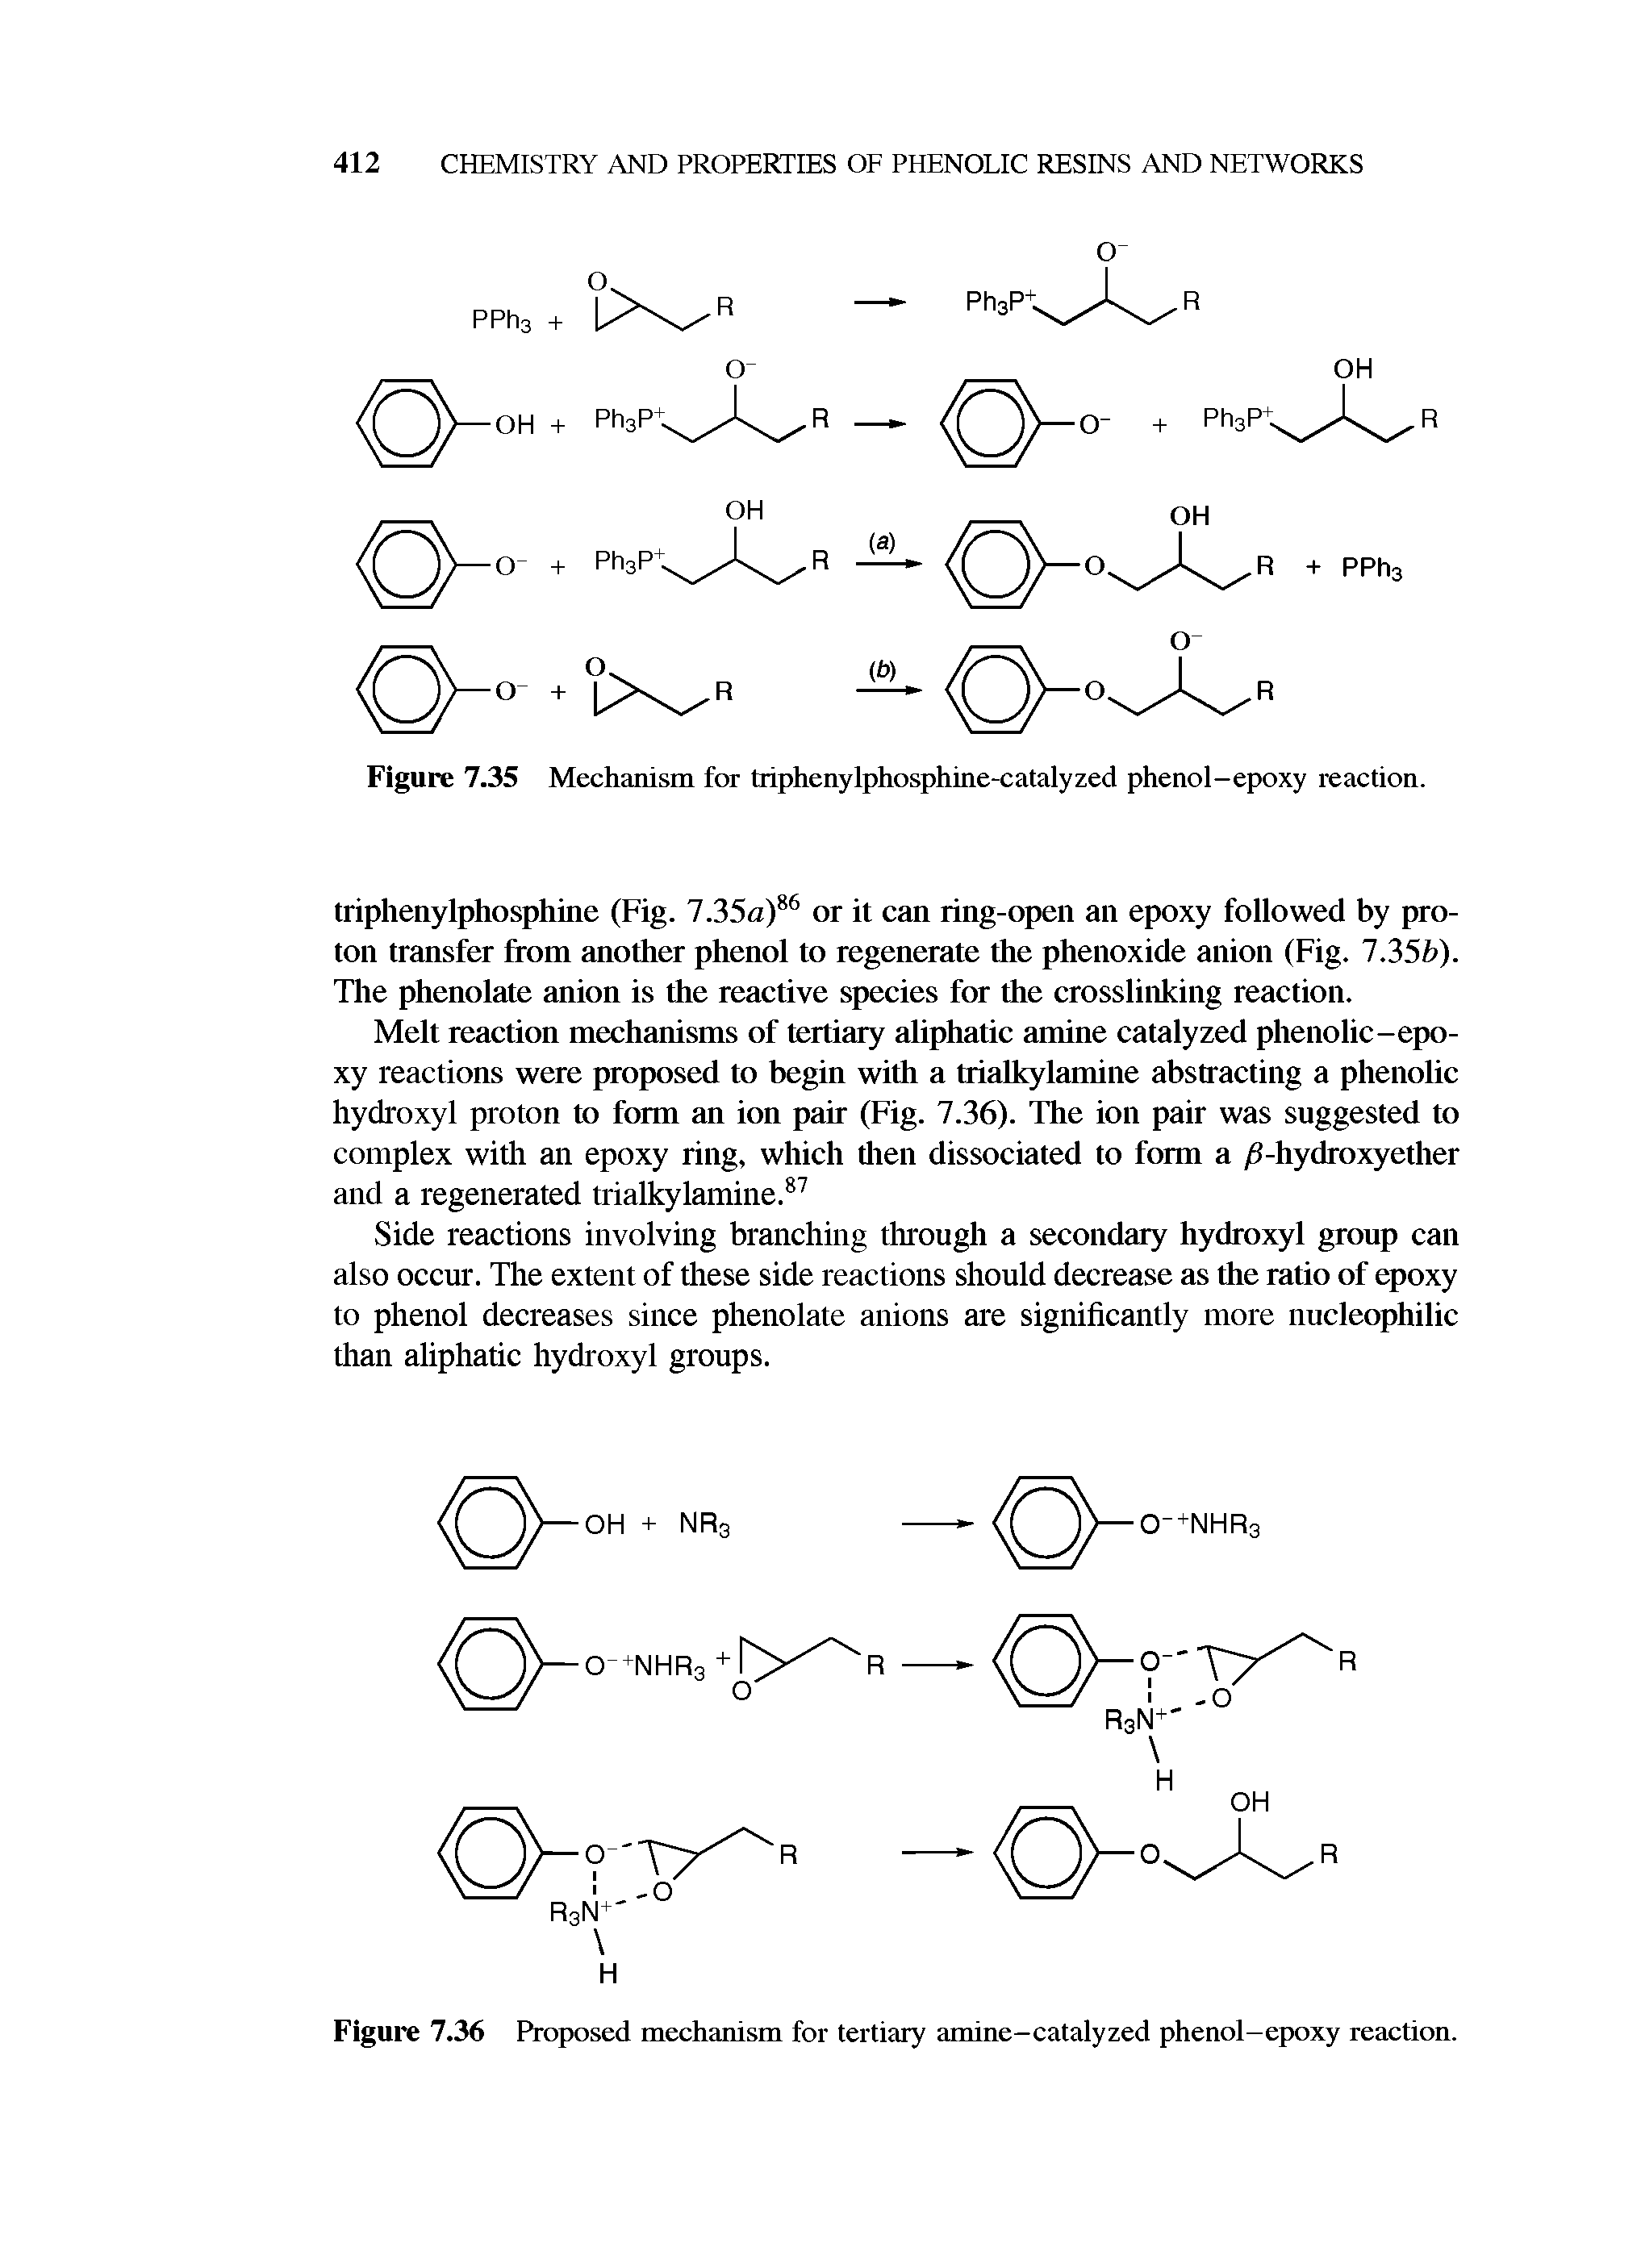 Figure 7.36 Proposed mechanism for tertiary amine-catalyzed phenol-epoxy reaction.